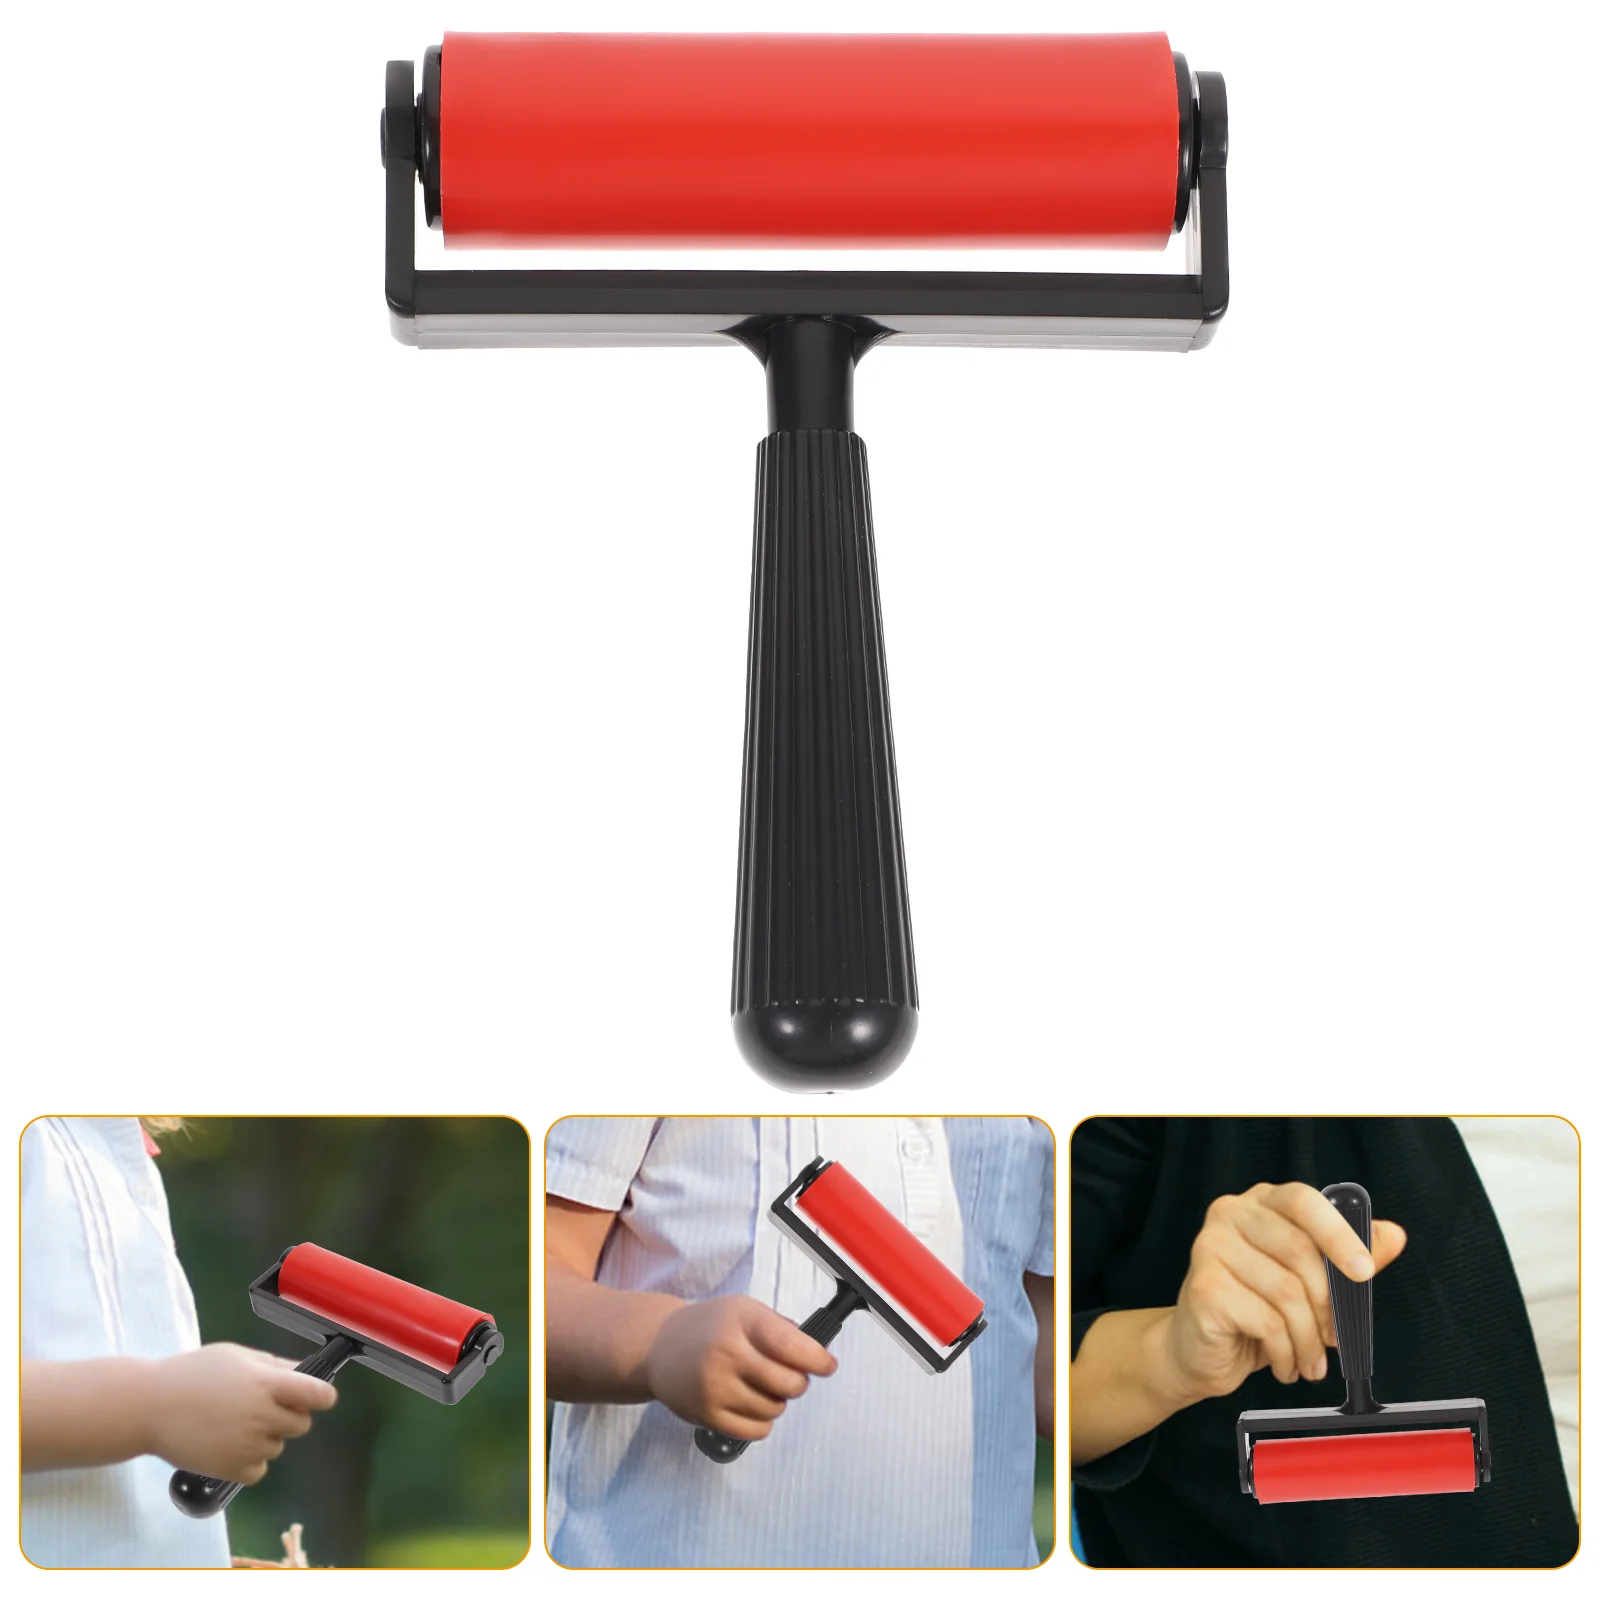 

10cm Printmaking Rubber Brayer Roller Ink Brush Craft Stamping Brayers Roller for Crafting Wallpapers Application ( Red )